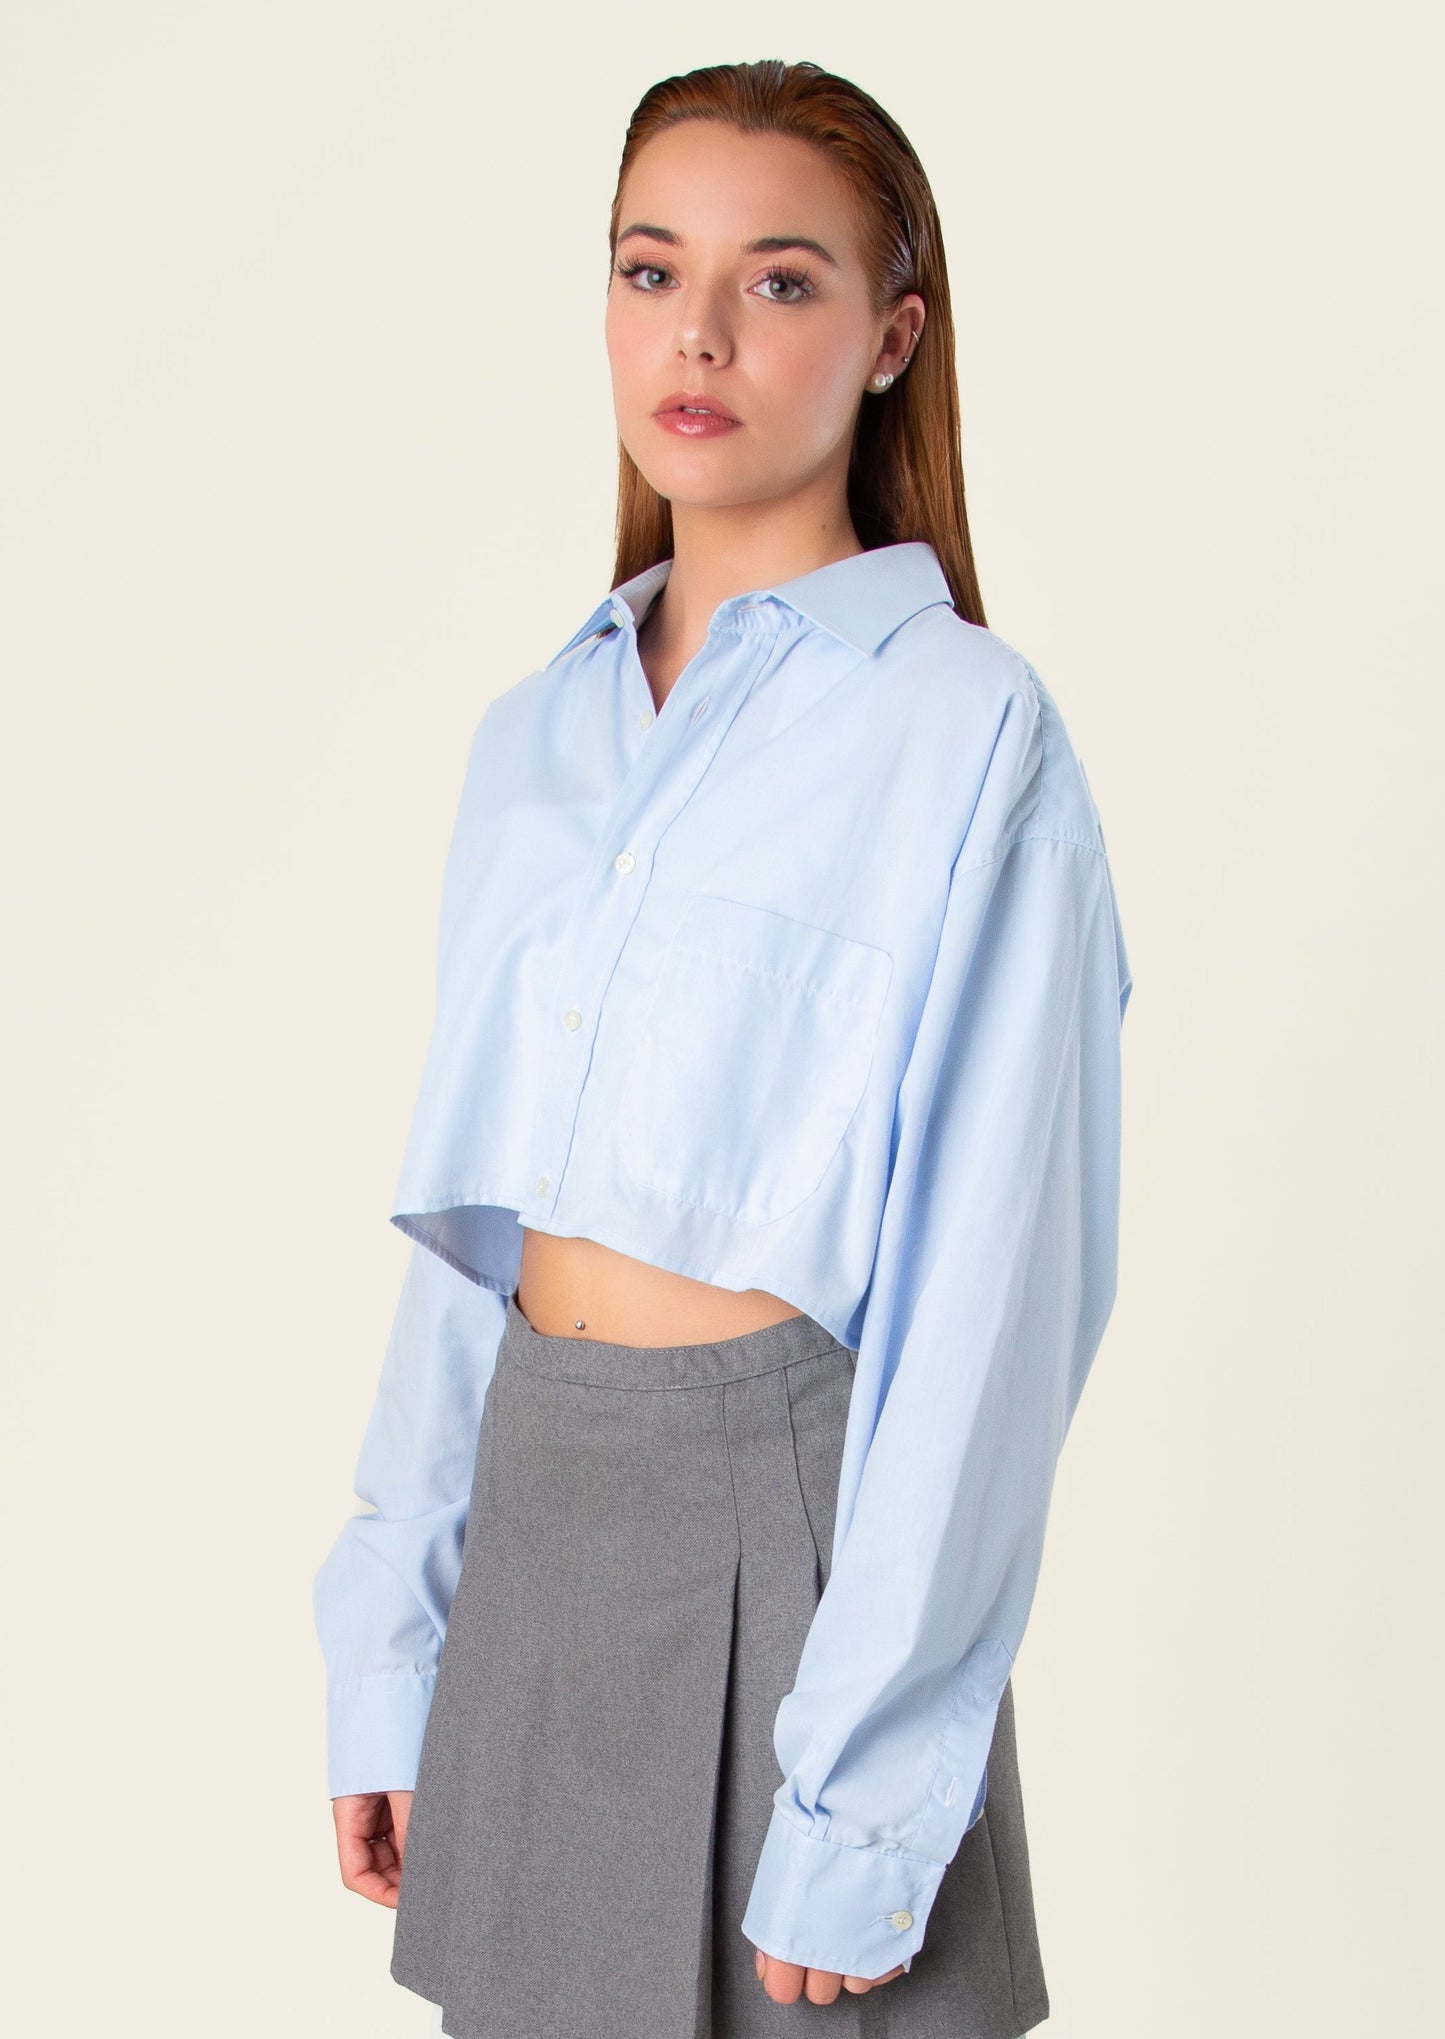 Cropped Business Shirt